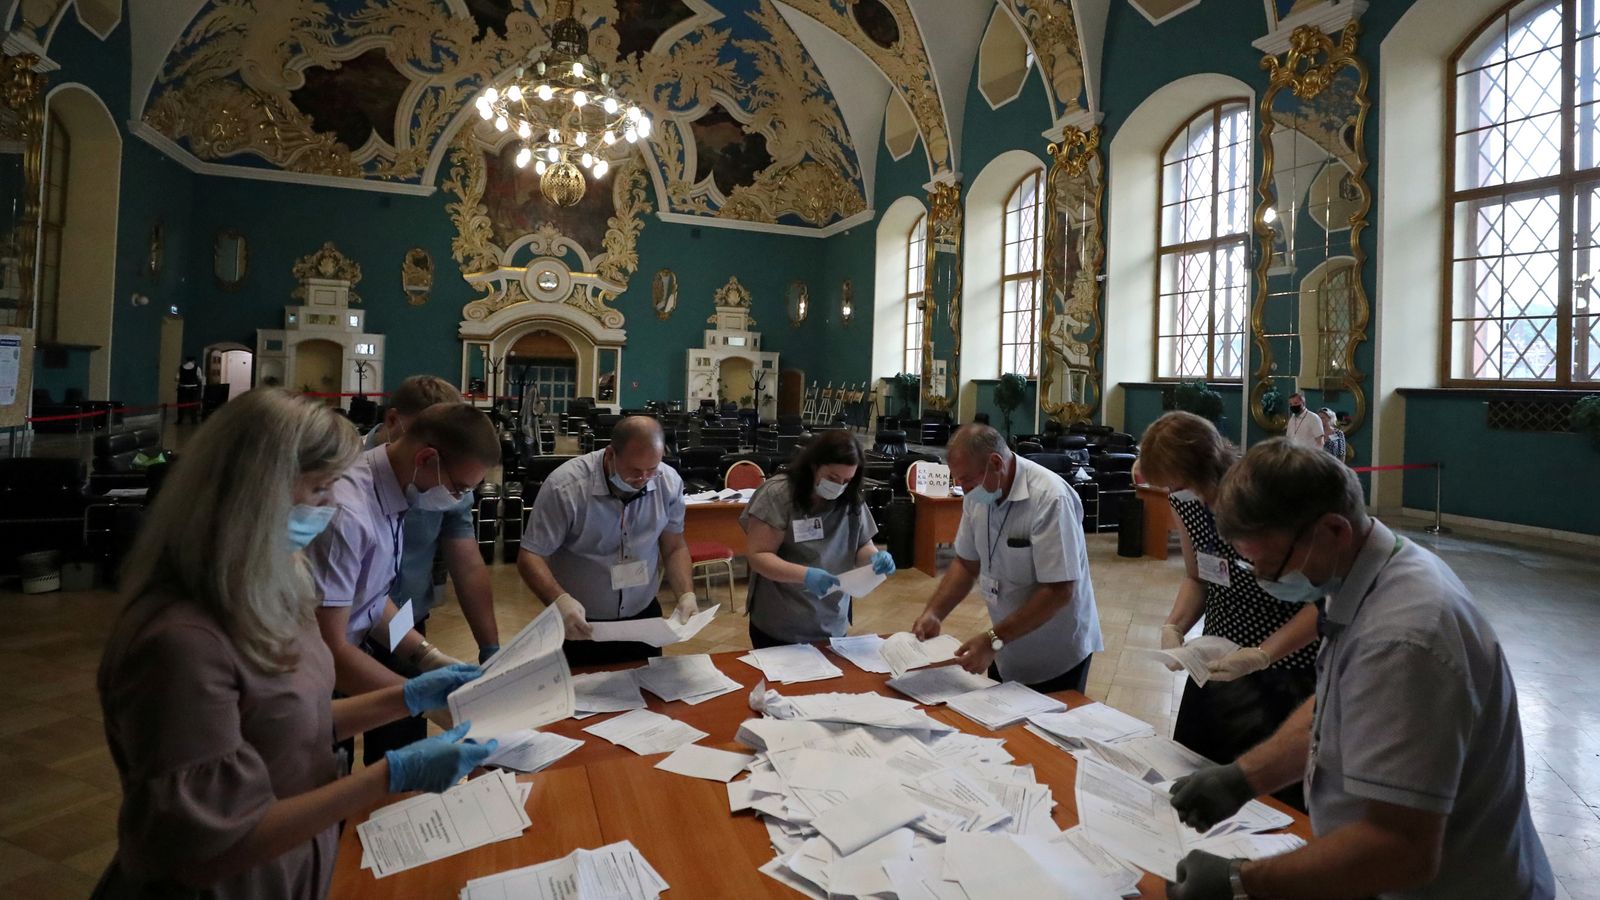 Russian voting. Voting Russia. Change to Constitution. Constitutions of the World. Russian Constitution photo.